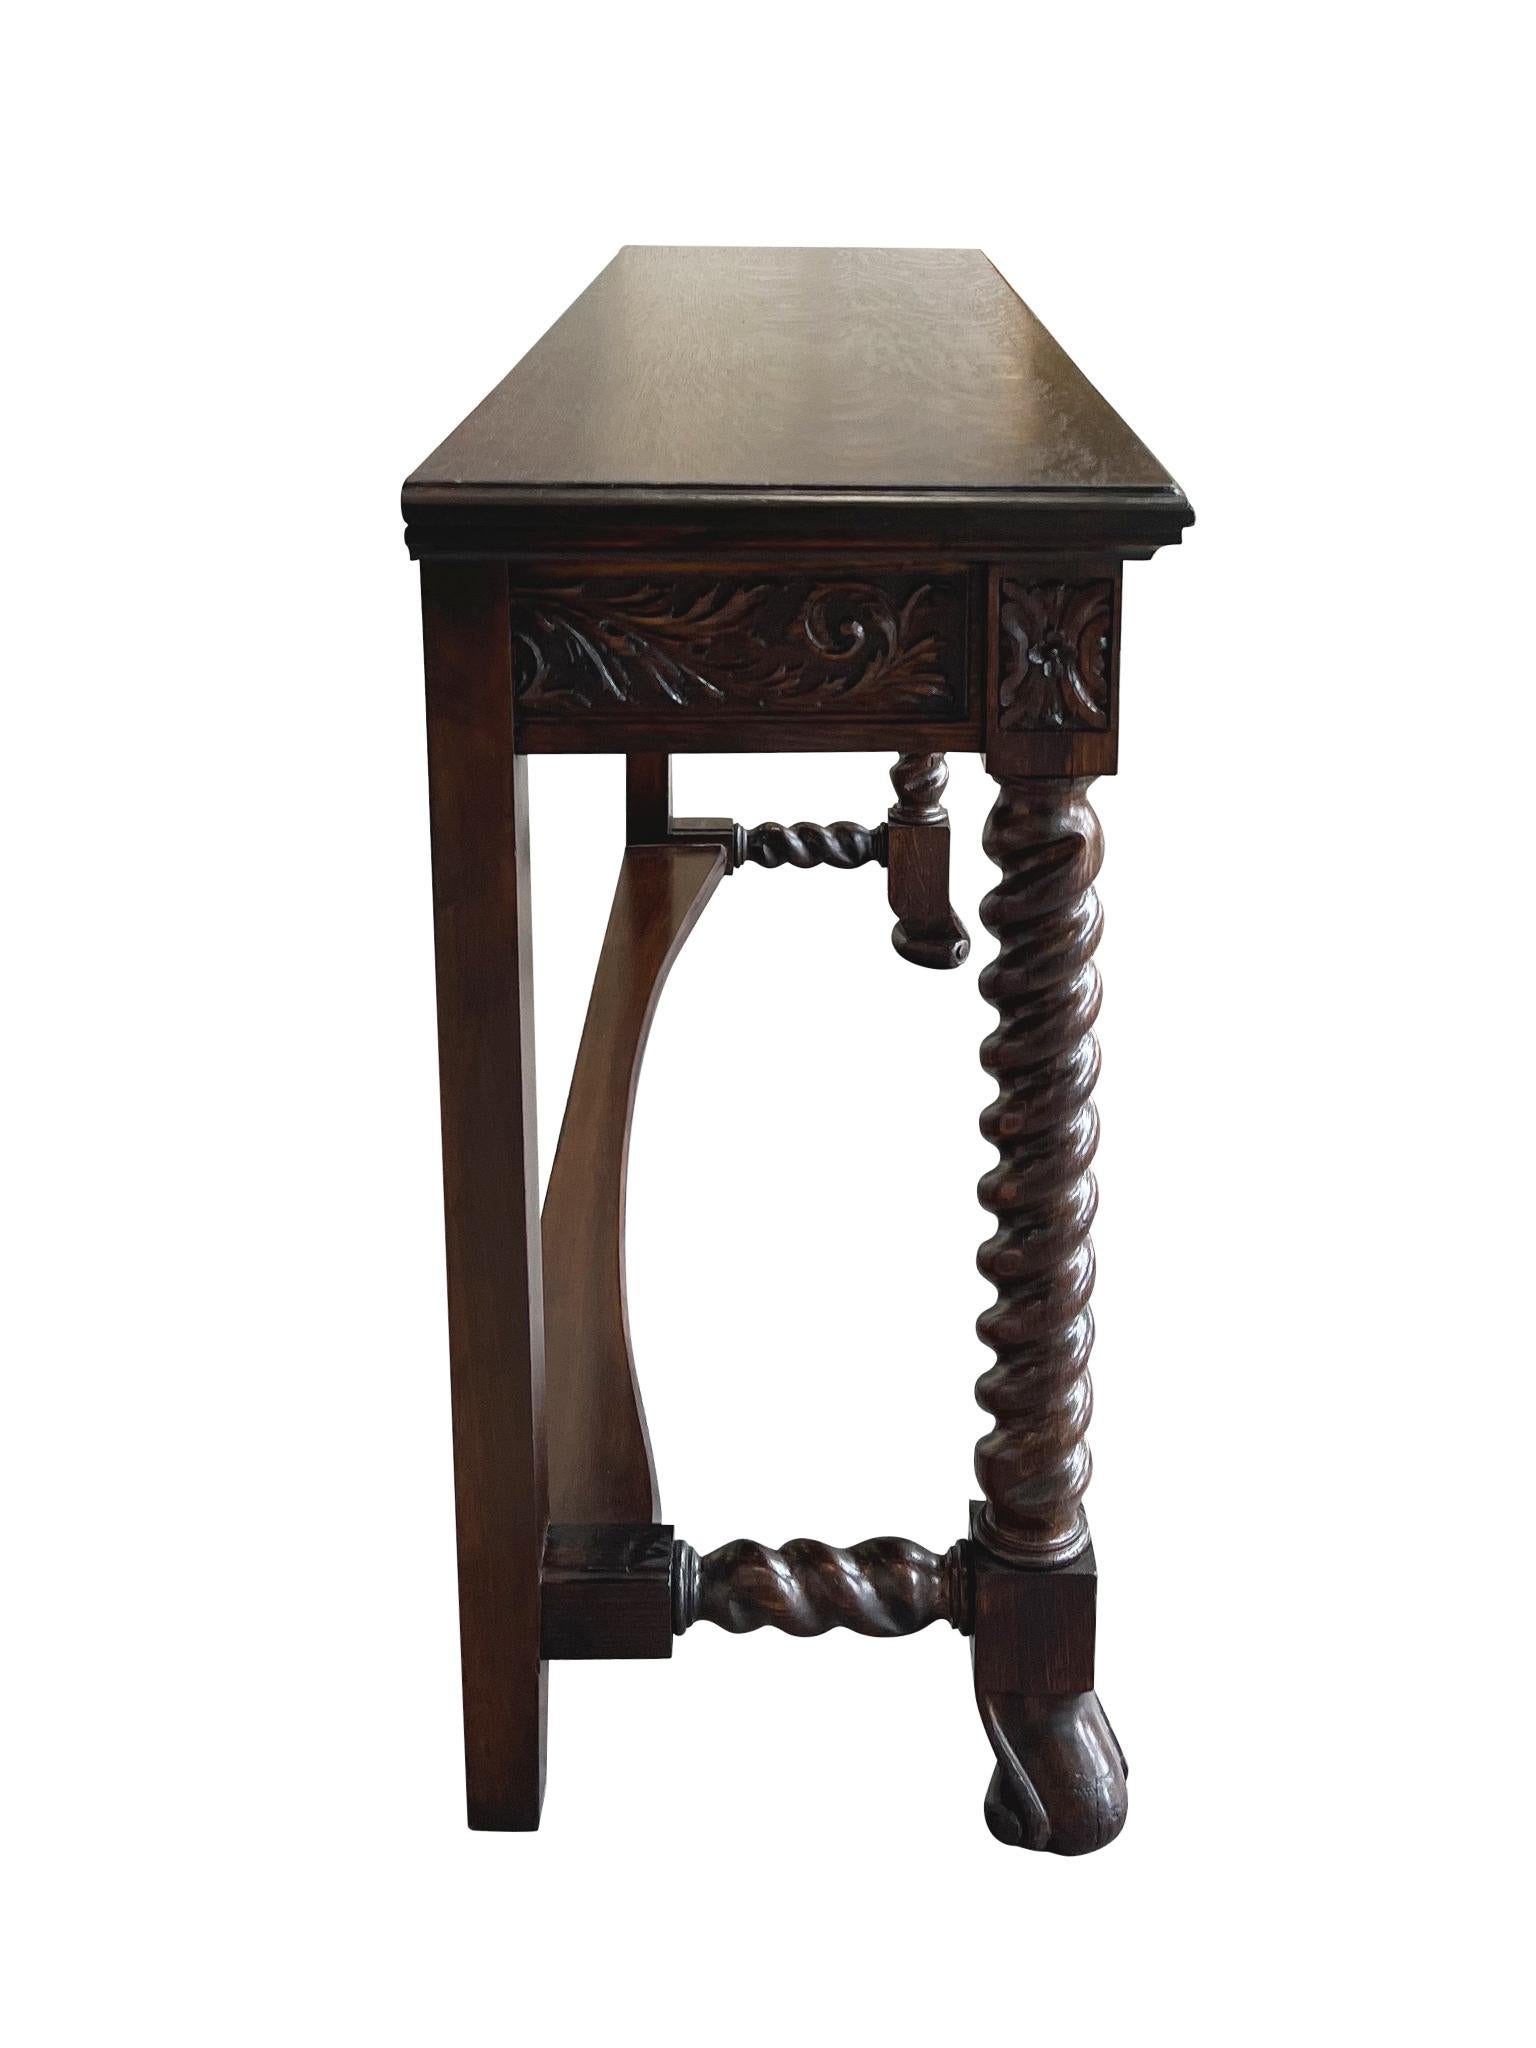 Hand-Carved 19th Century Jacobean Revival Console Table